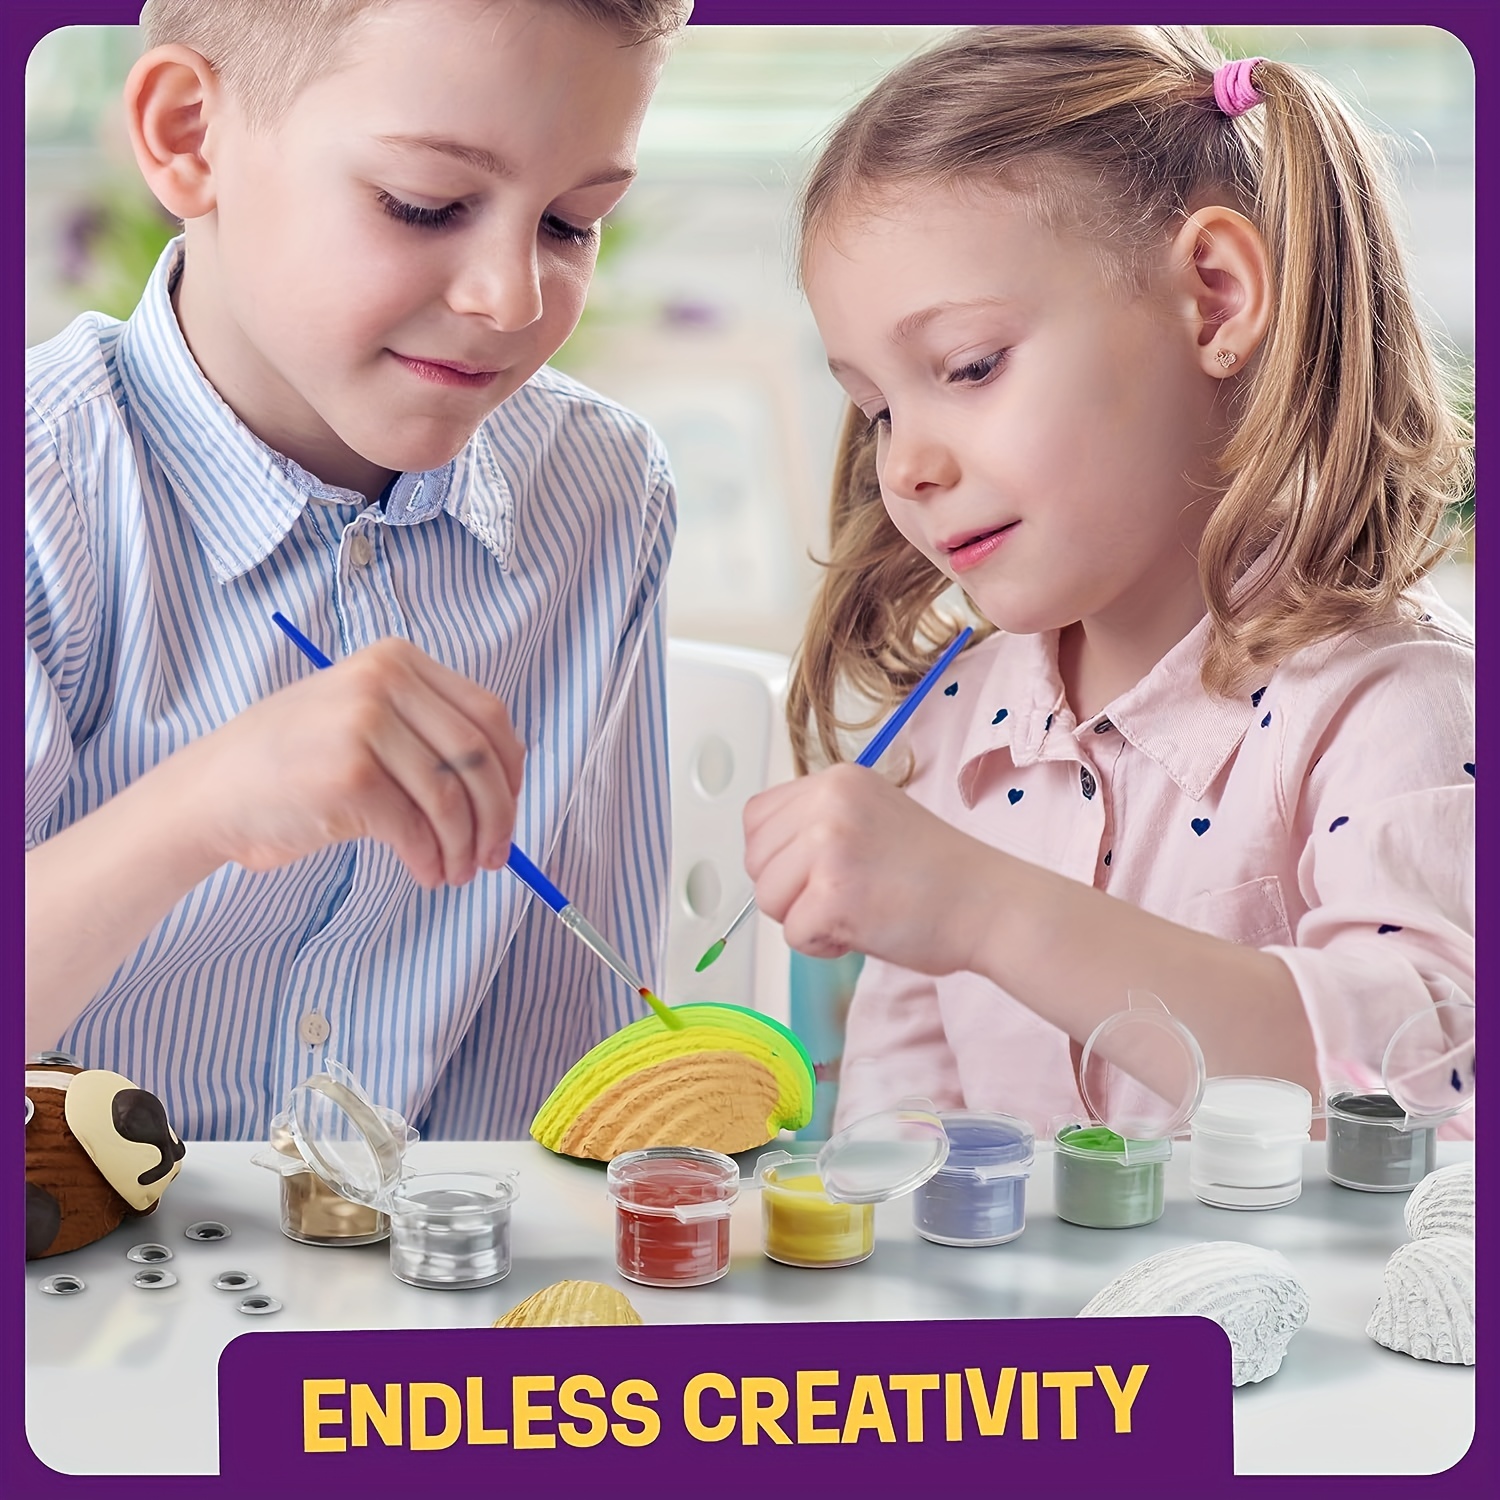 Craft Kits For Kids - Best Boredom Busters - Dear Creatives